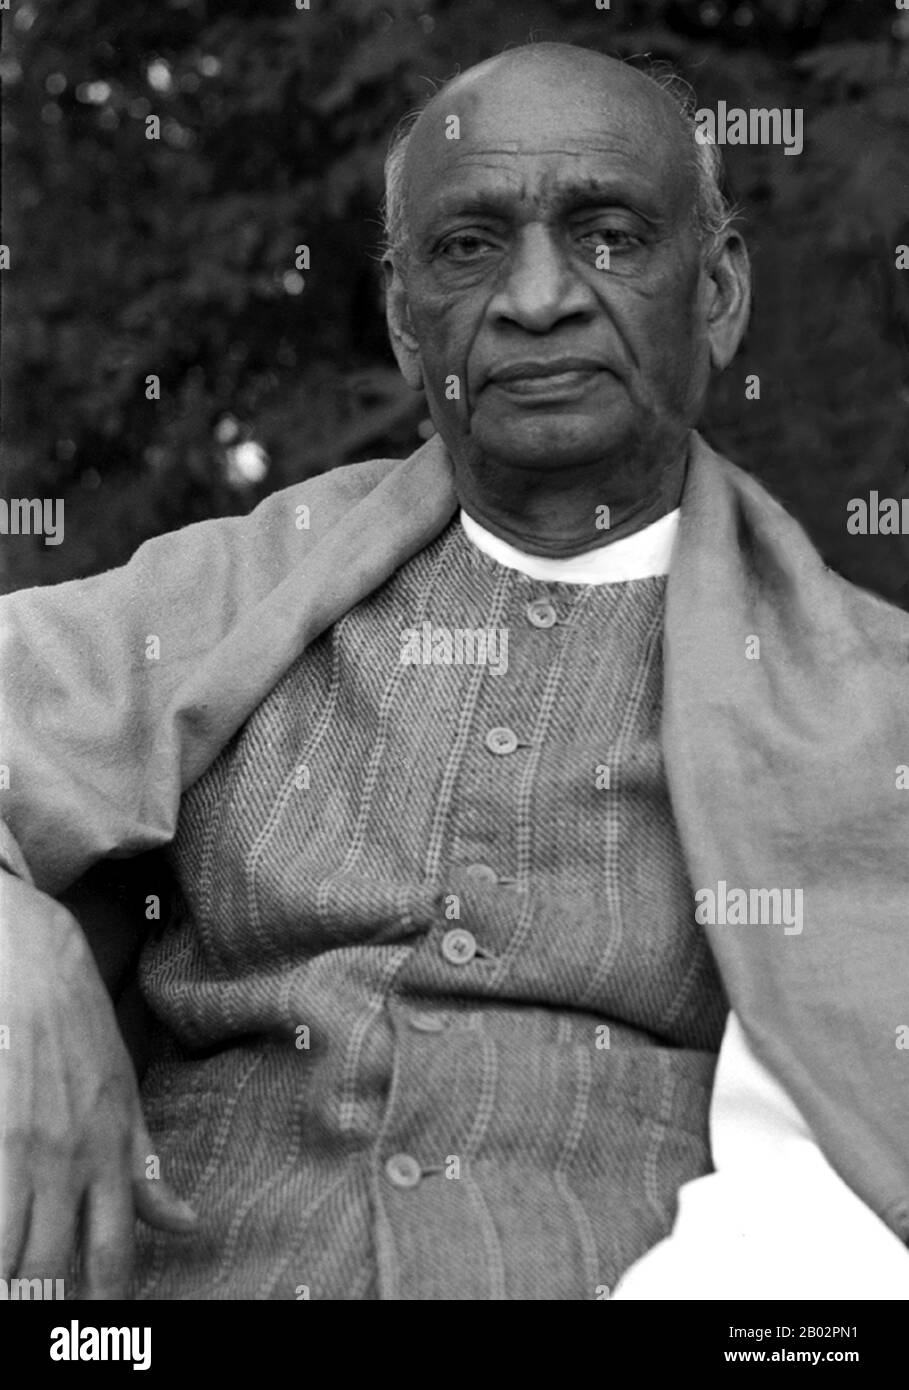 Vallabhbhai Jhaverbhai Patel (31 October 1875 – 15 December 1950) was an Indian barrister and statesman, one of the leaders of the Indian National Congress and one of the founding fathers of the Republic of India.  He was a social leader who played a leading role in the country's struggle for independence and guided its integration into a united, independent nation. In India and elsewhere, he was often addressed as Sardar, which means Chief in Hindi, Urdu and Persian. Stock Photo